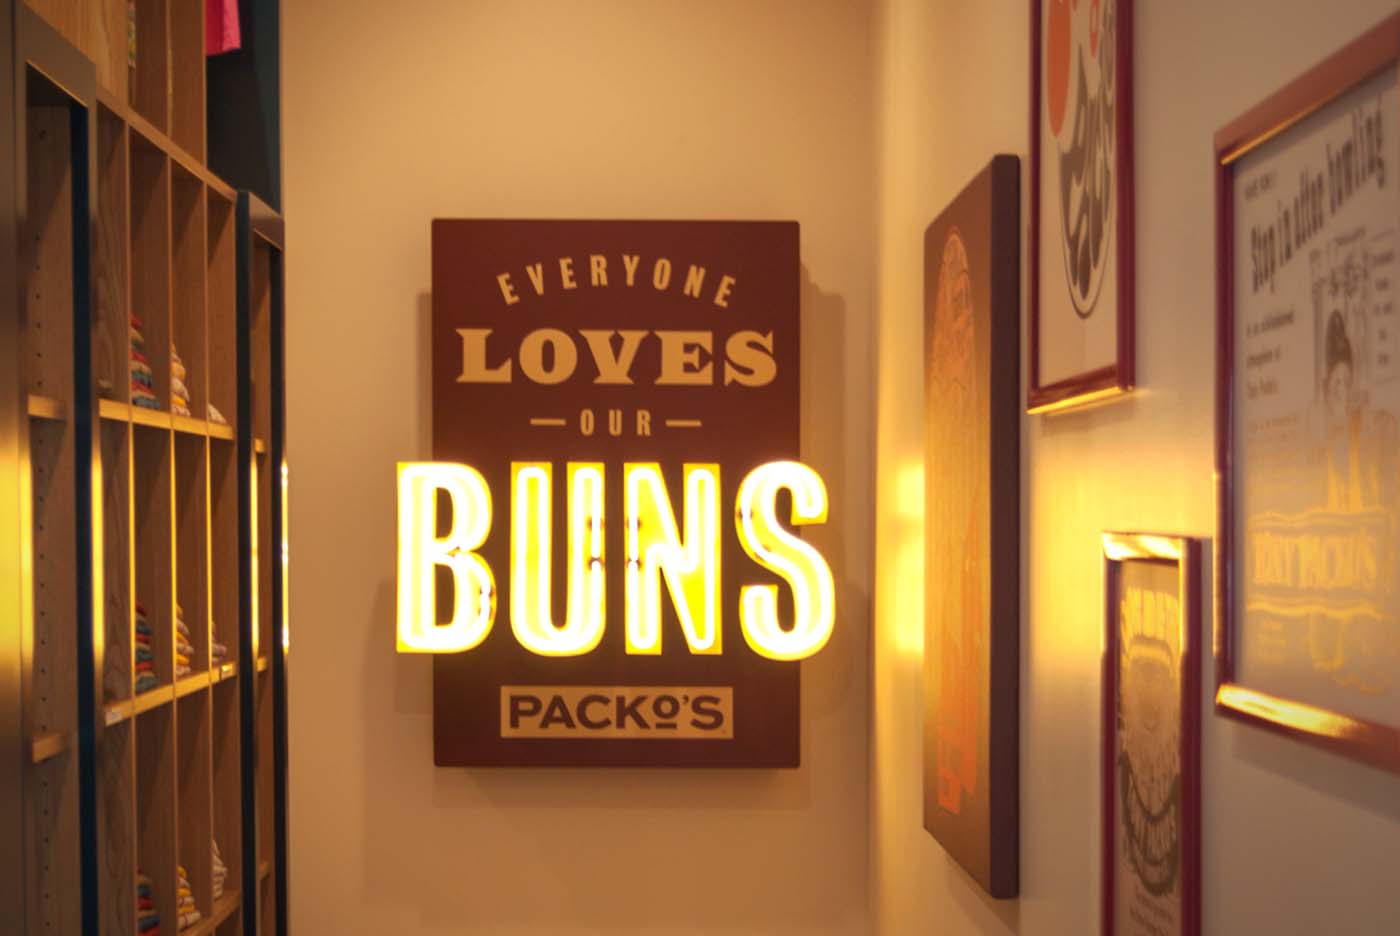 Everyone loves our Buns Sign